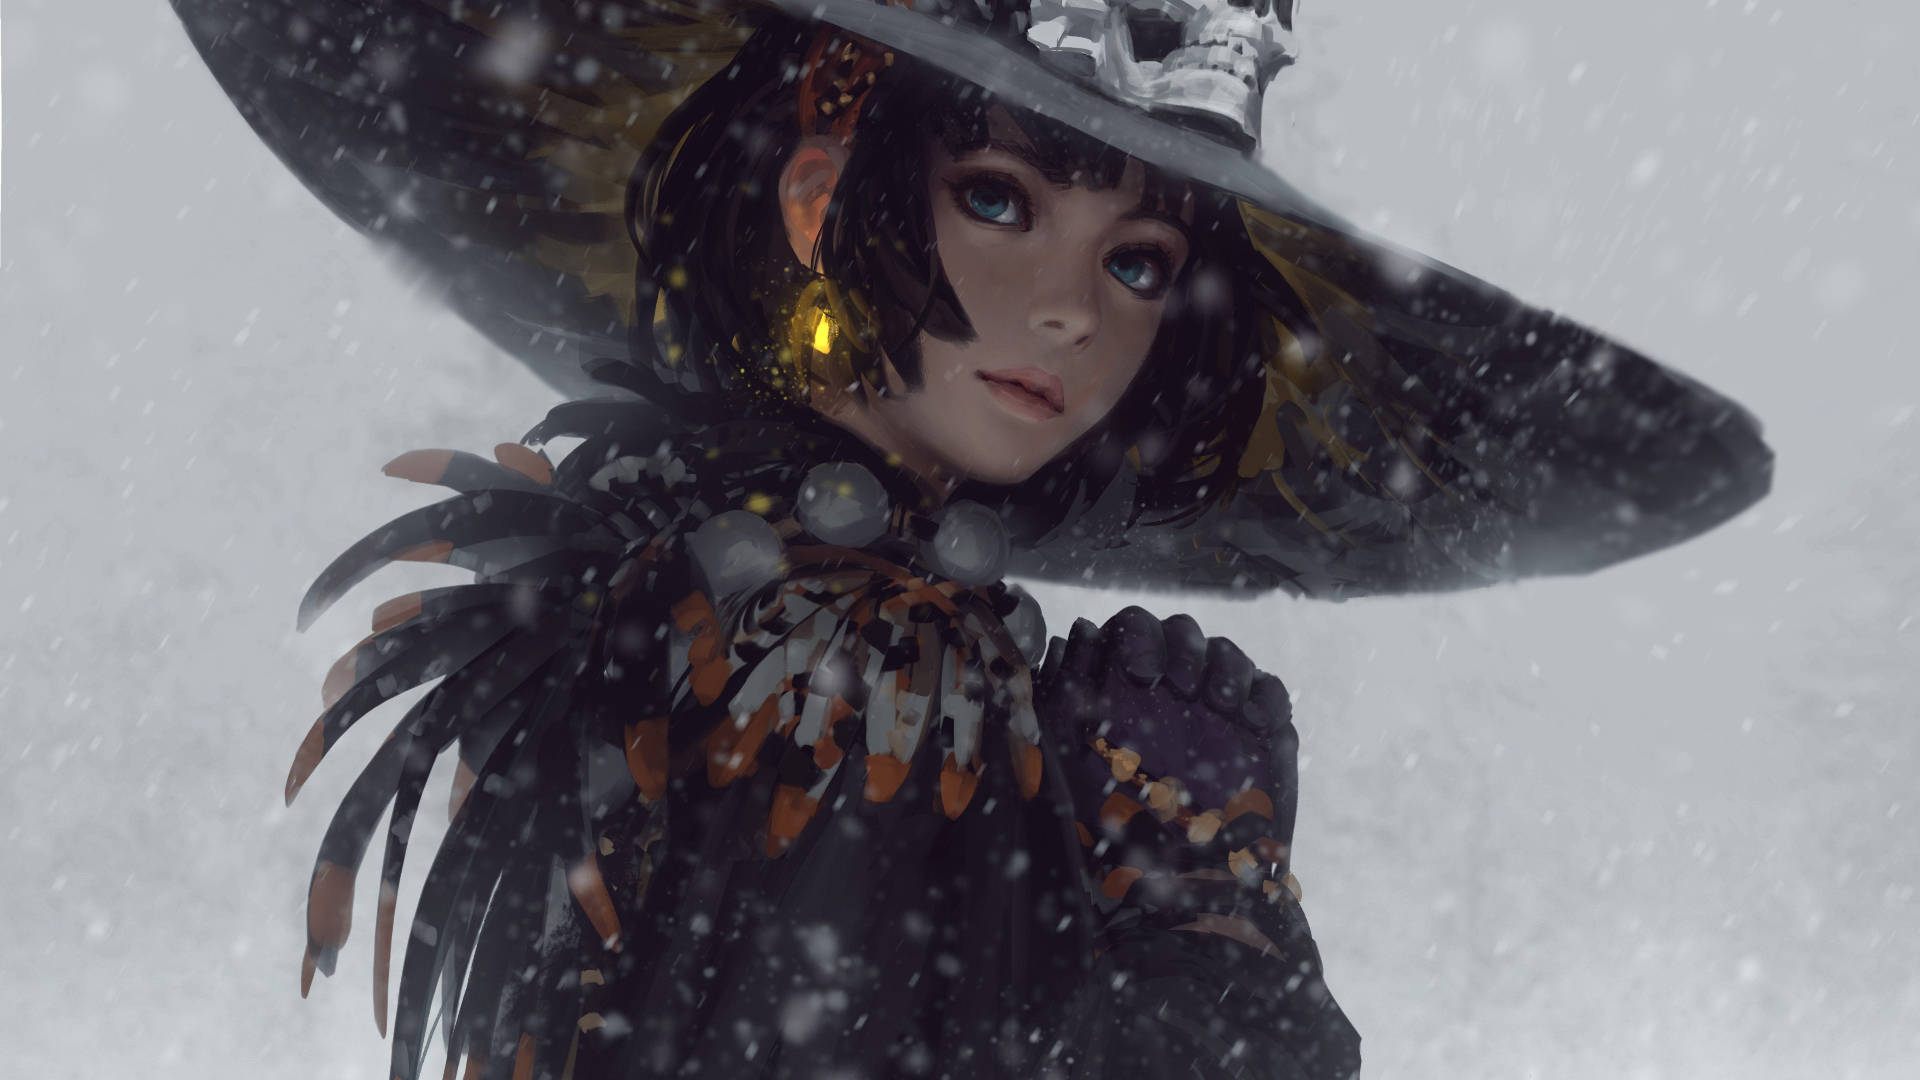 Witchy Anime Girl In Snow Background